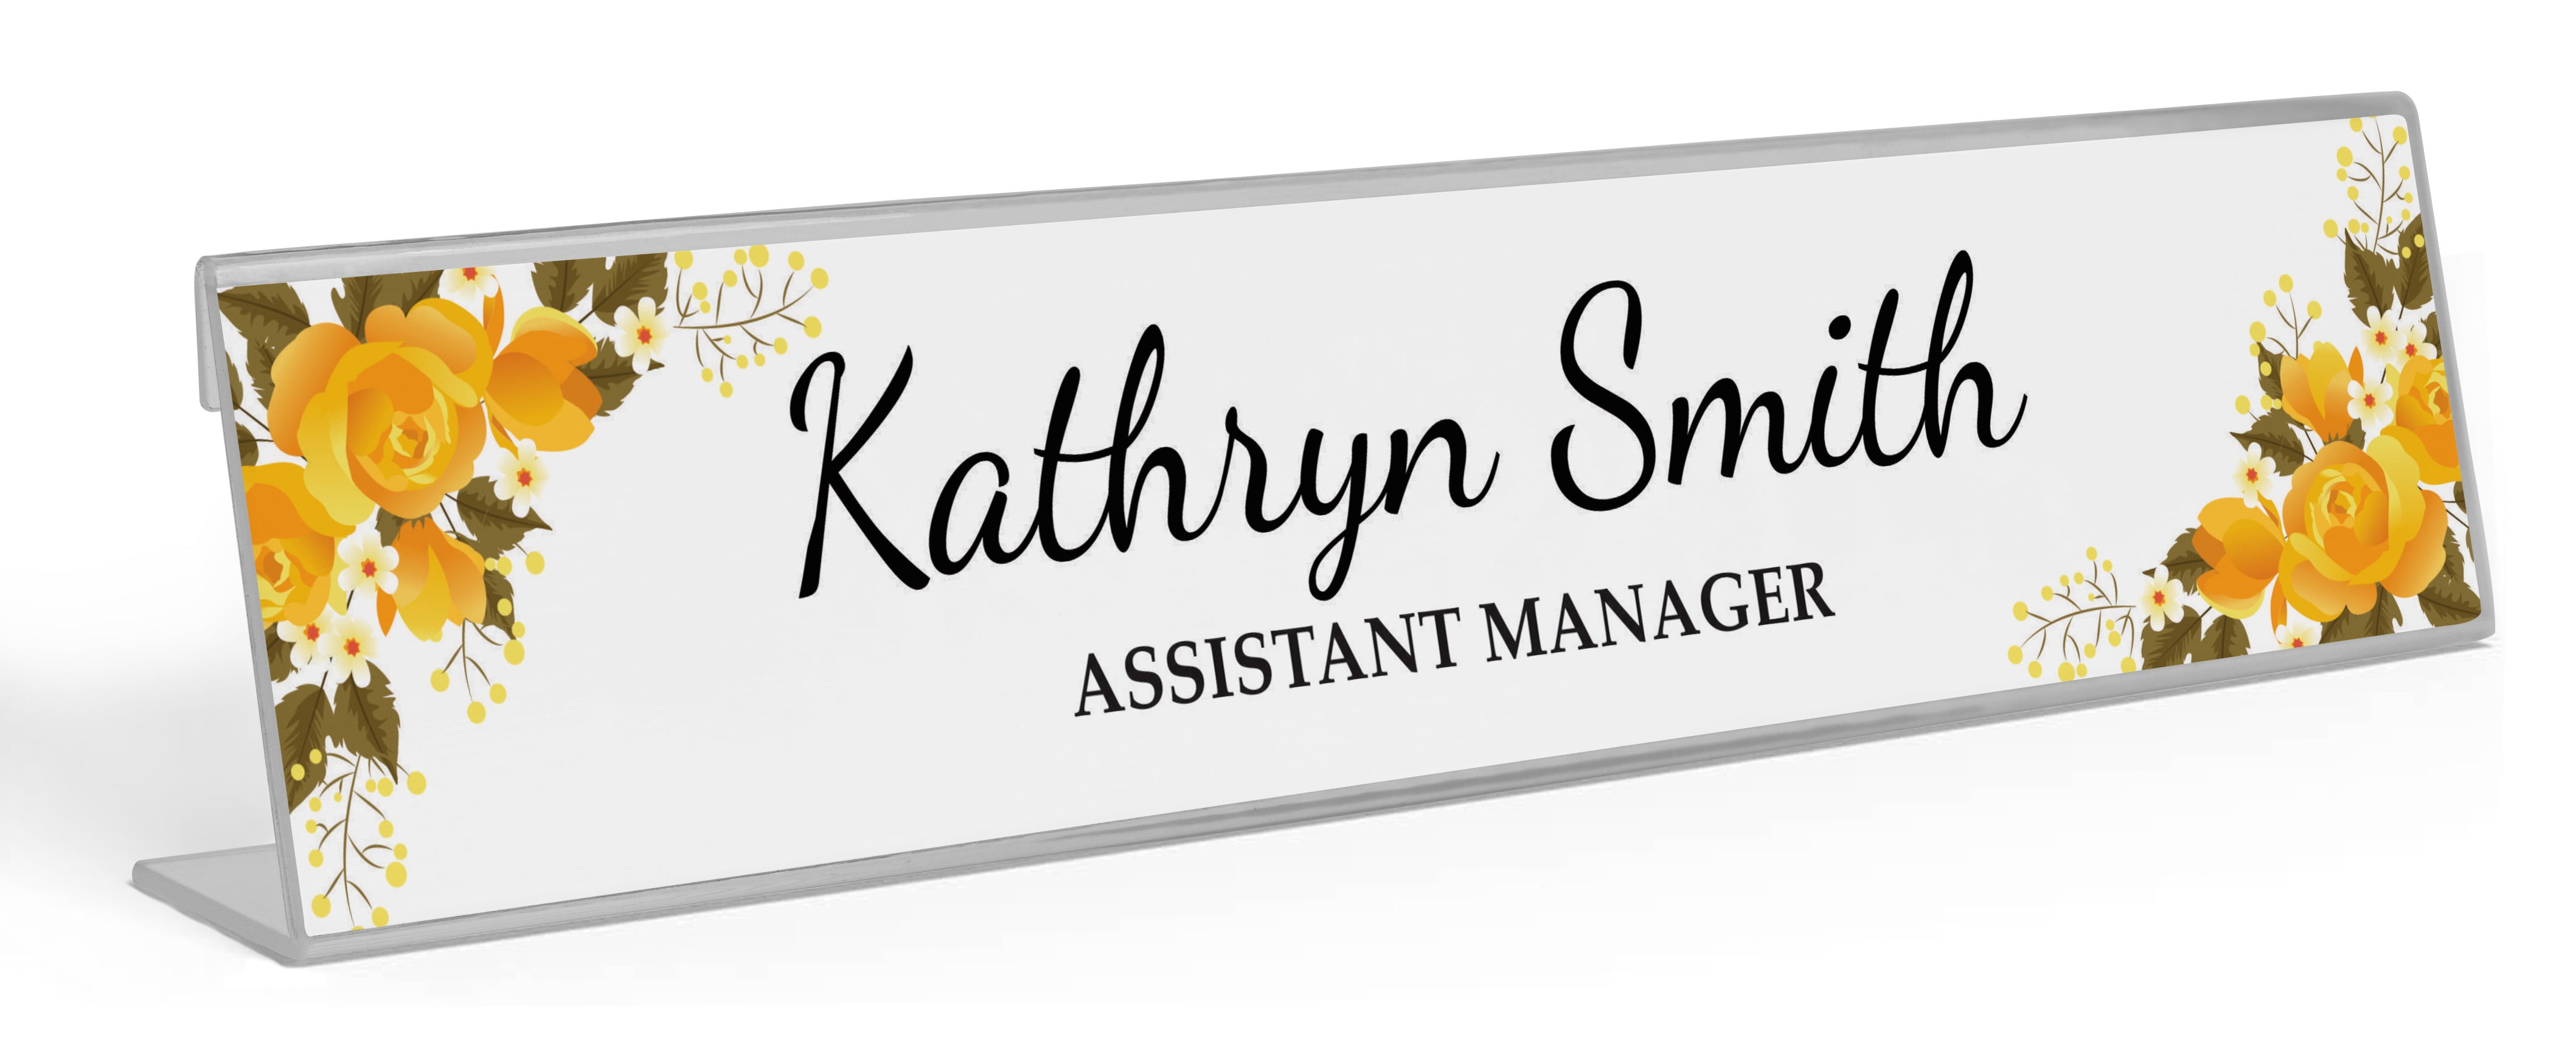 Acrylic Name Plate Office Desk Bar 3/4-Inch Custom Personalized Engraved 